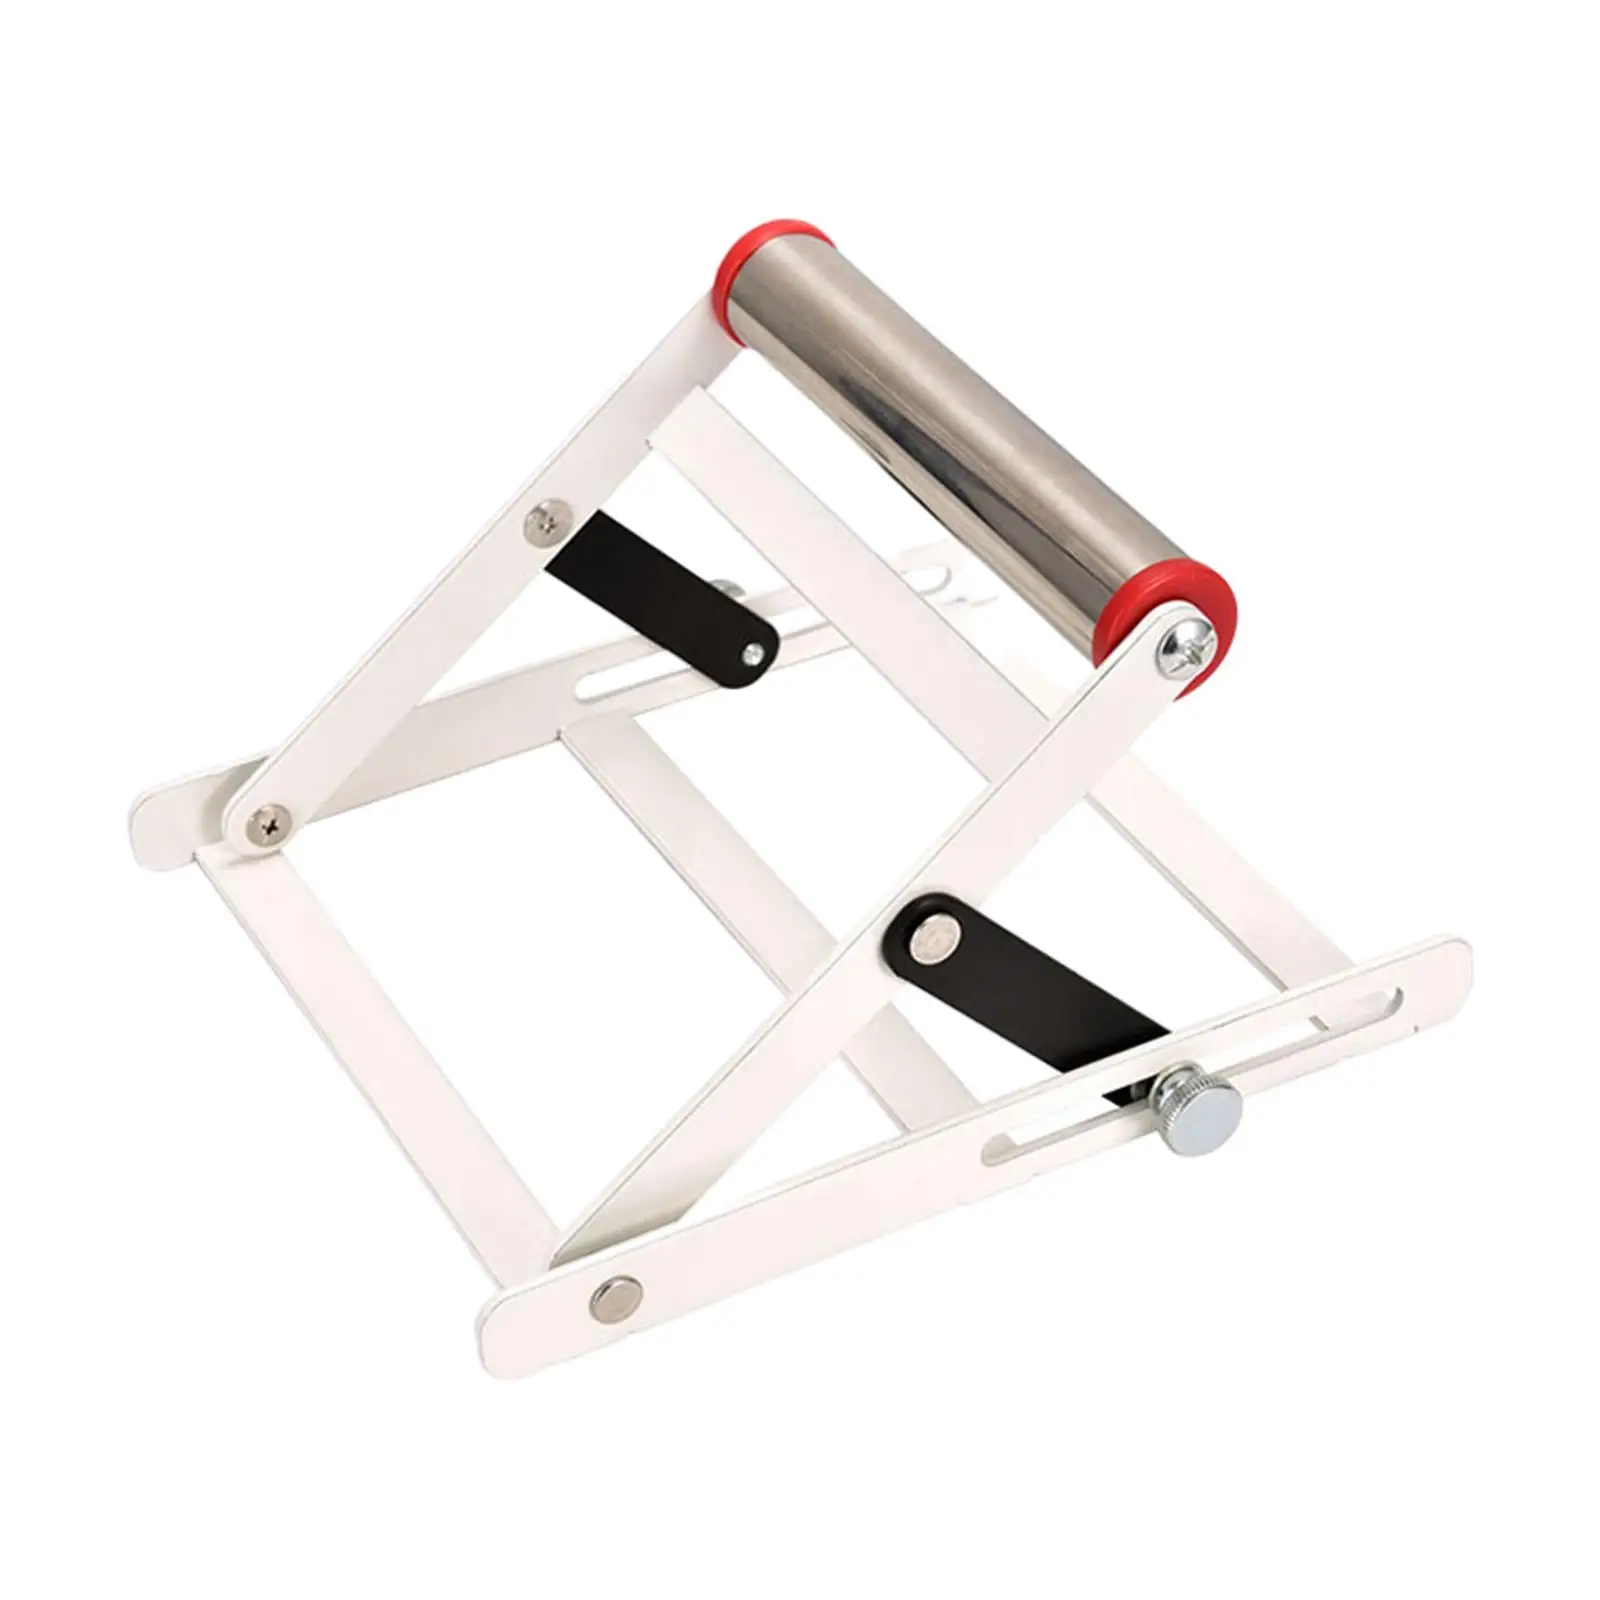 Cutting Machine Support Frame Stainless Steel Wear Resistant Stable Table Saw Stand for Accessory Good Performance Practical